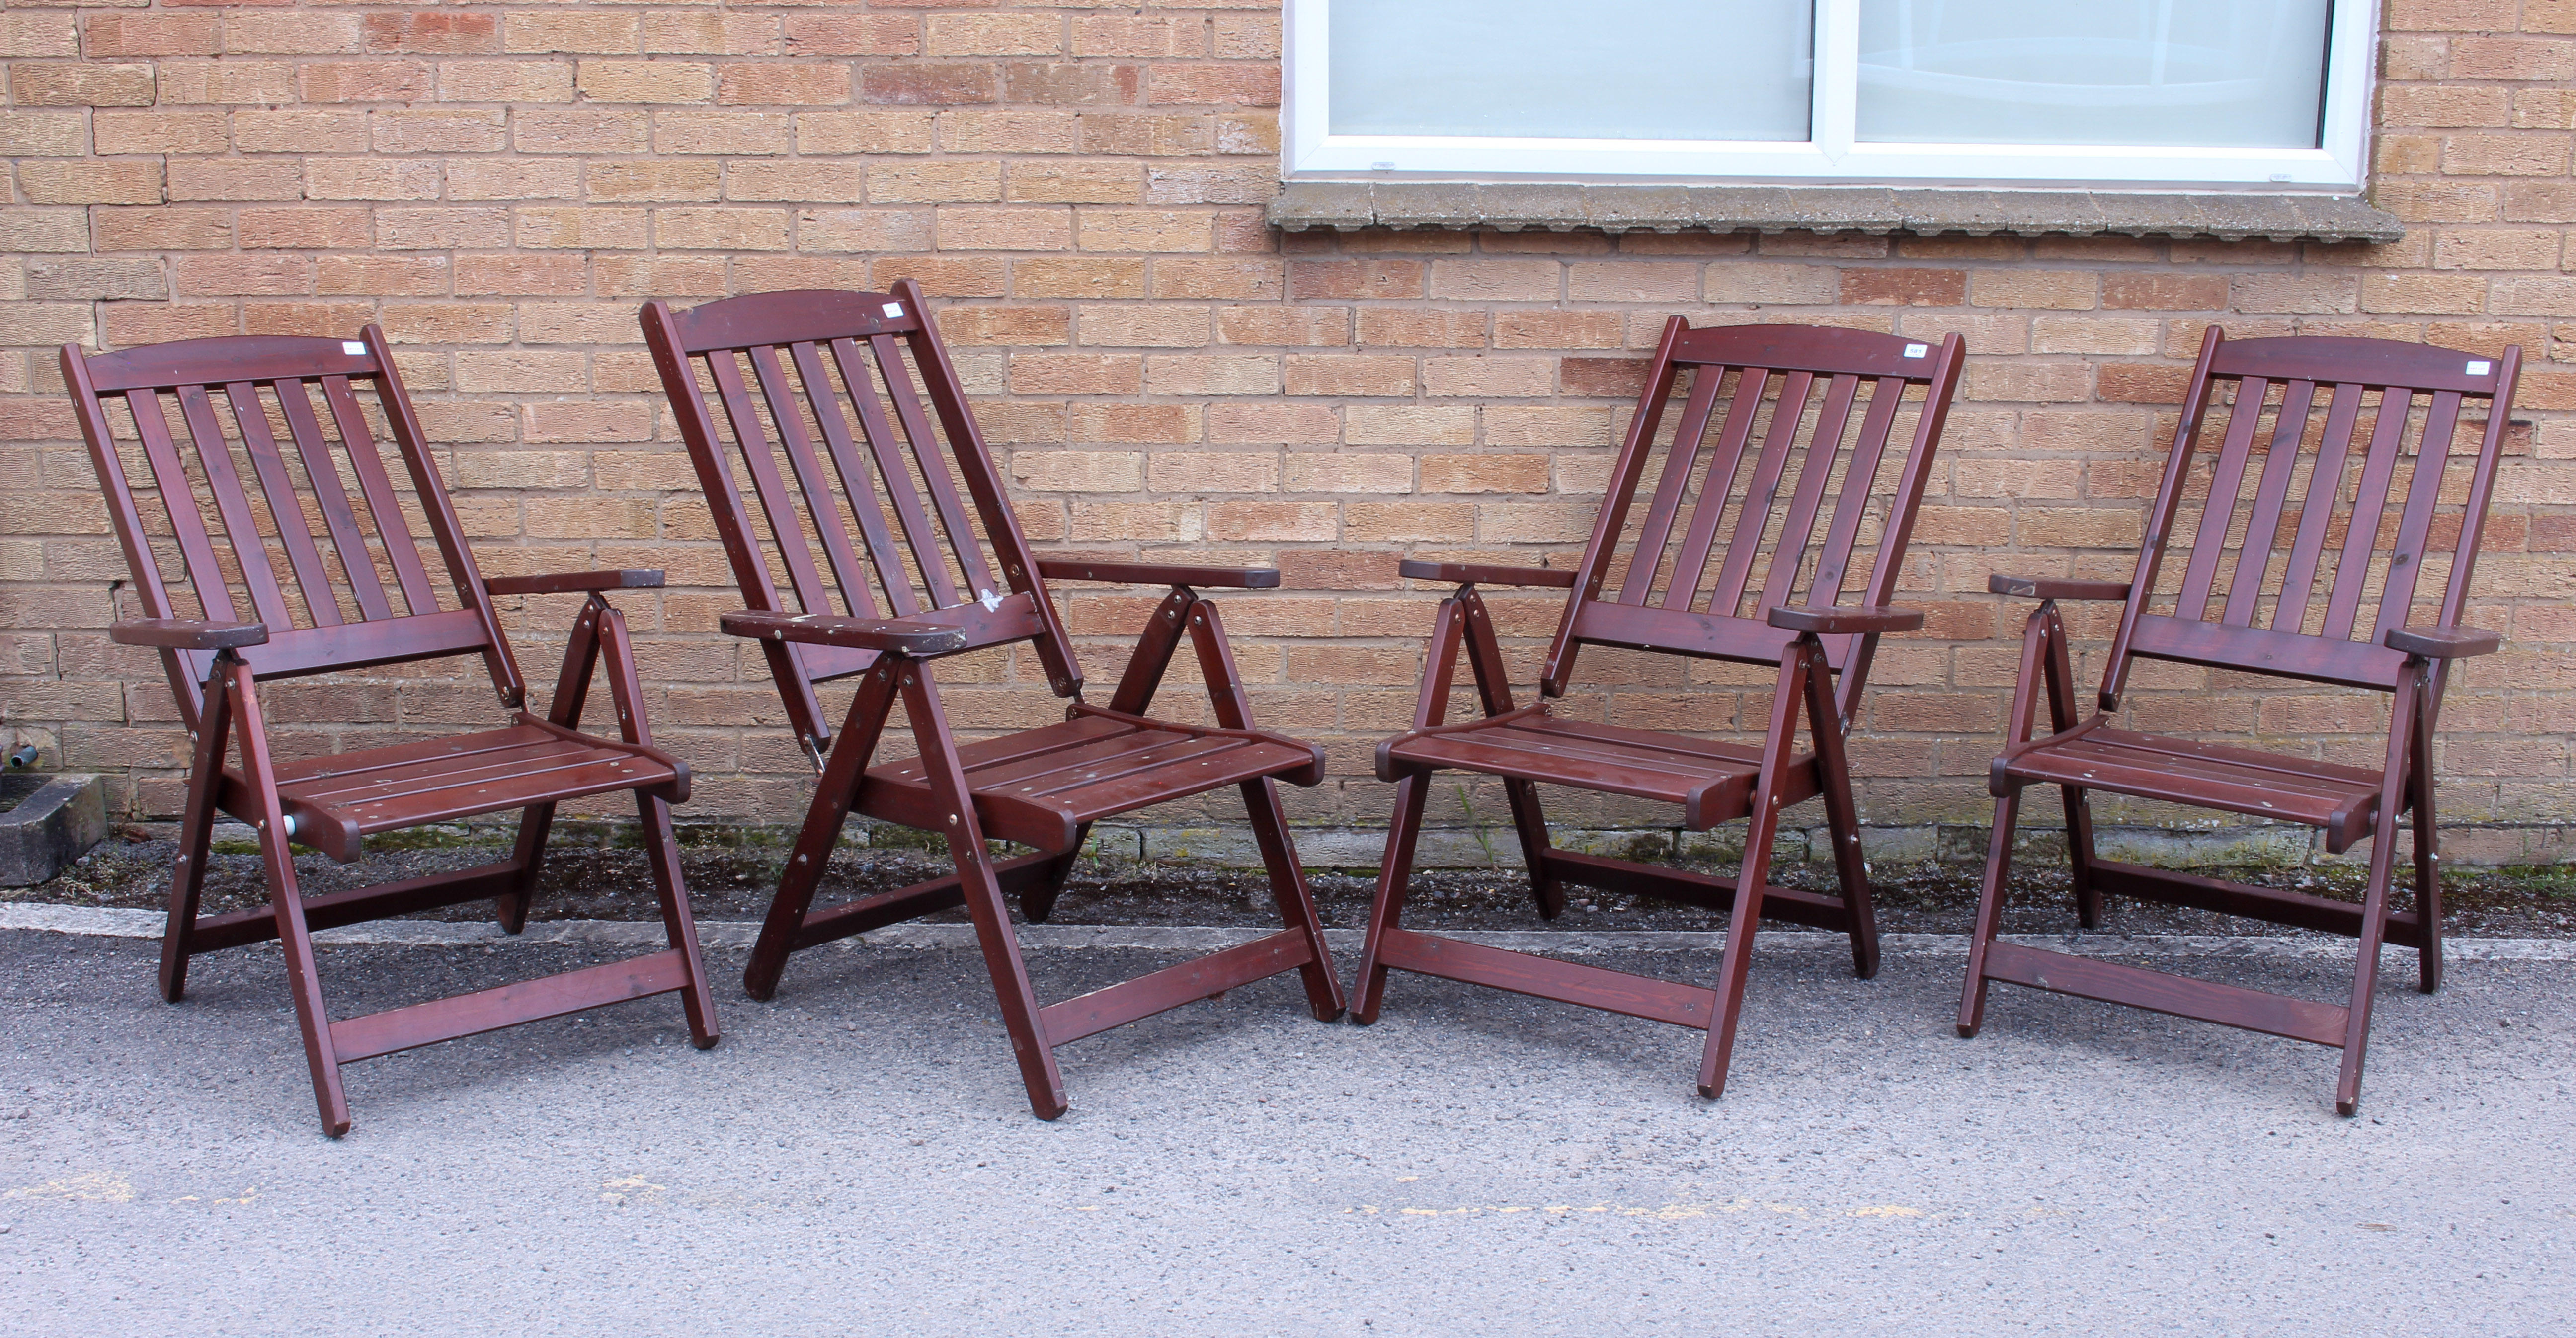 A set of four stained pine folding garden chairs - the seat backs adjustable to five positions, 66